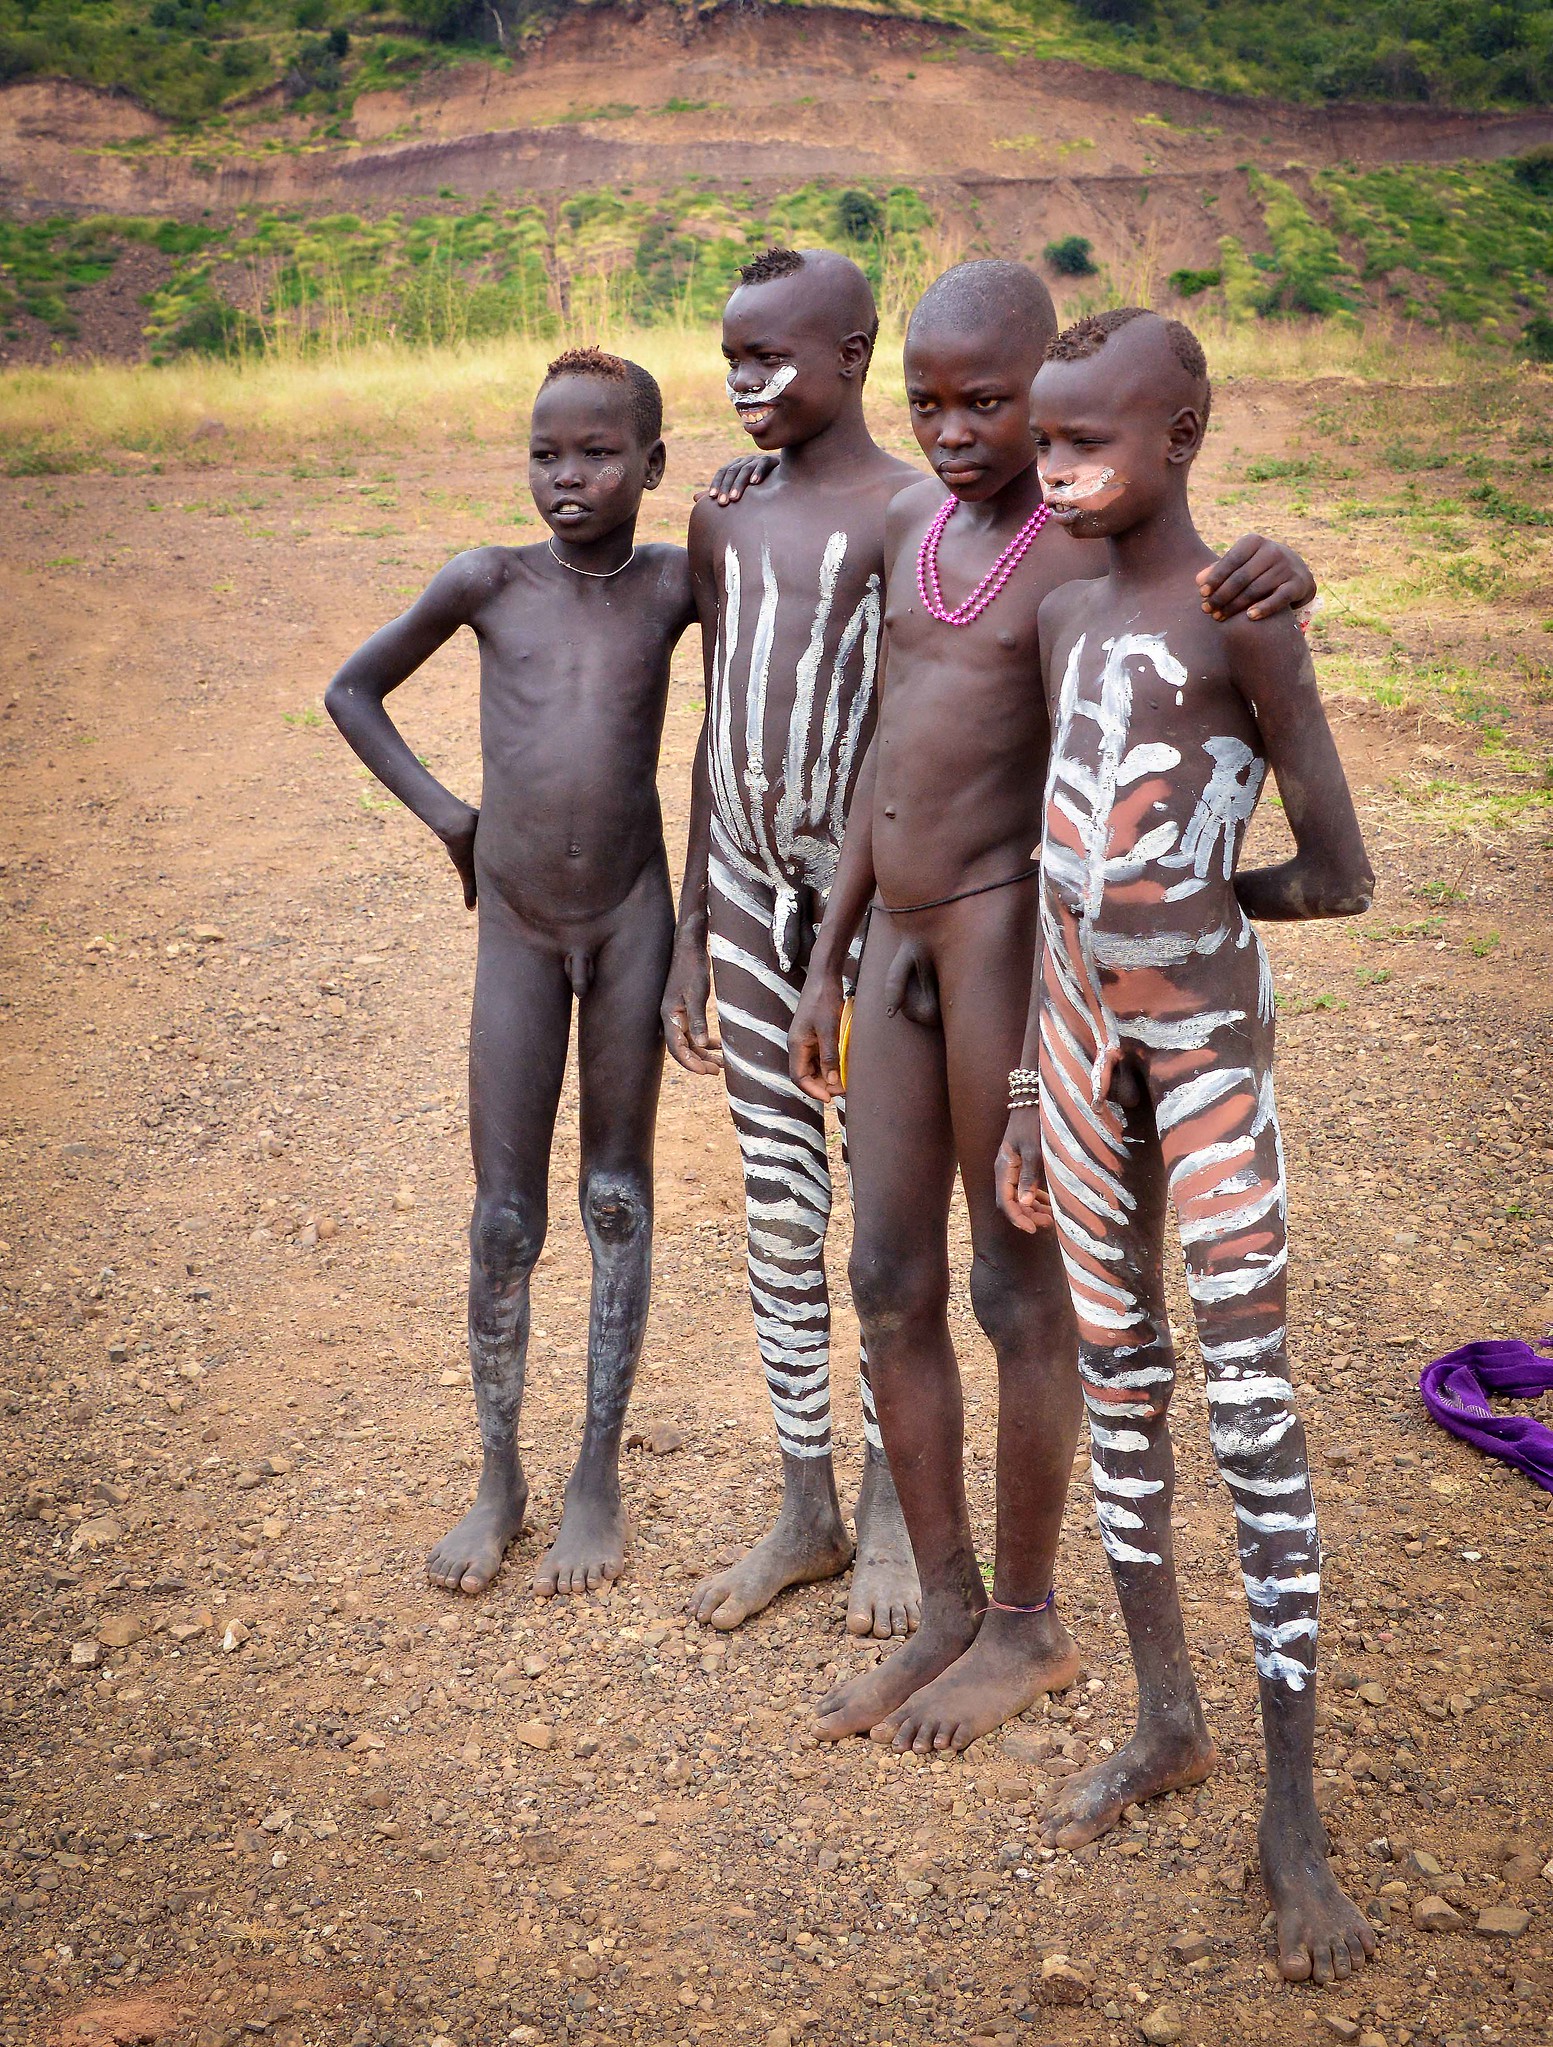 tribe boy nude African